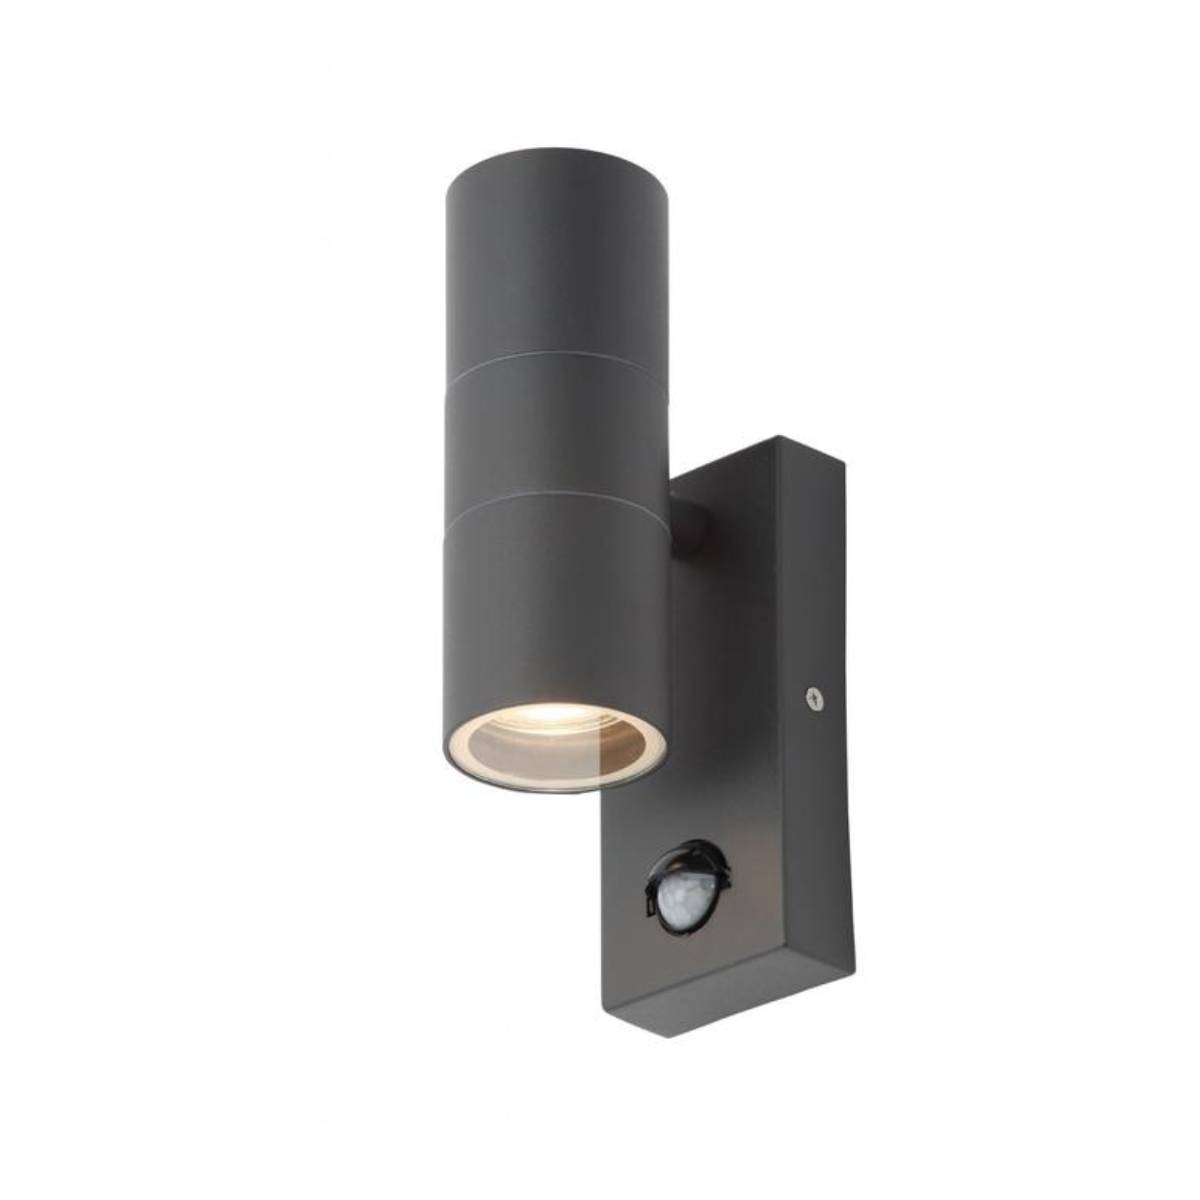 Forum Zinc ZN-29179-ANTH Leto Twin Up/Down Wall Light - Anthracite (11992)